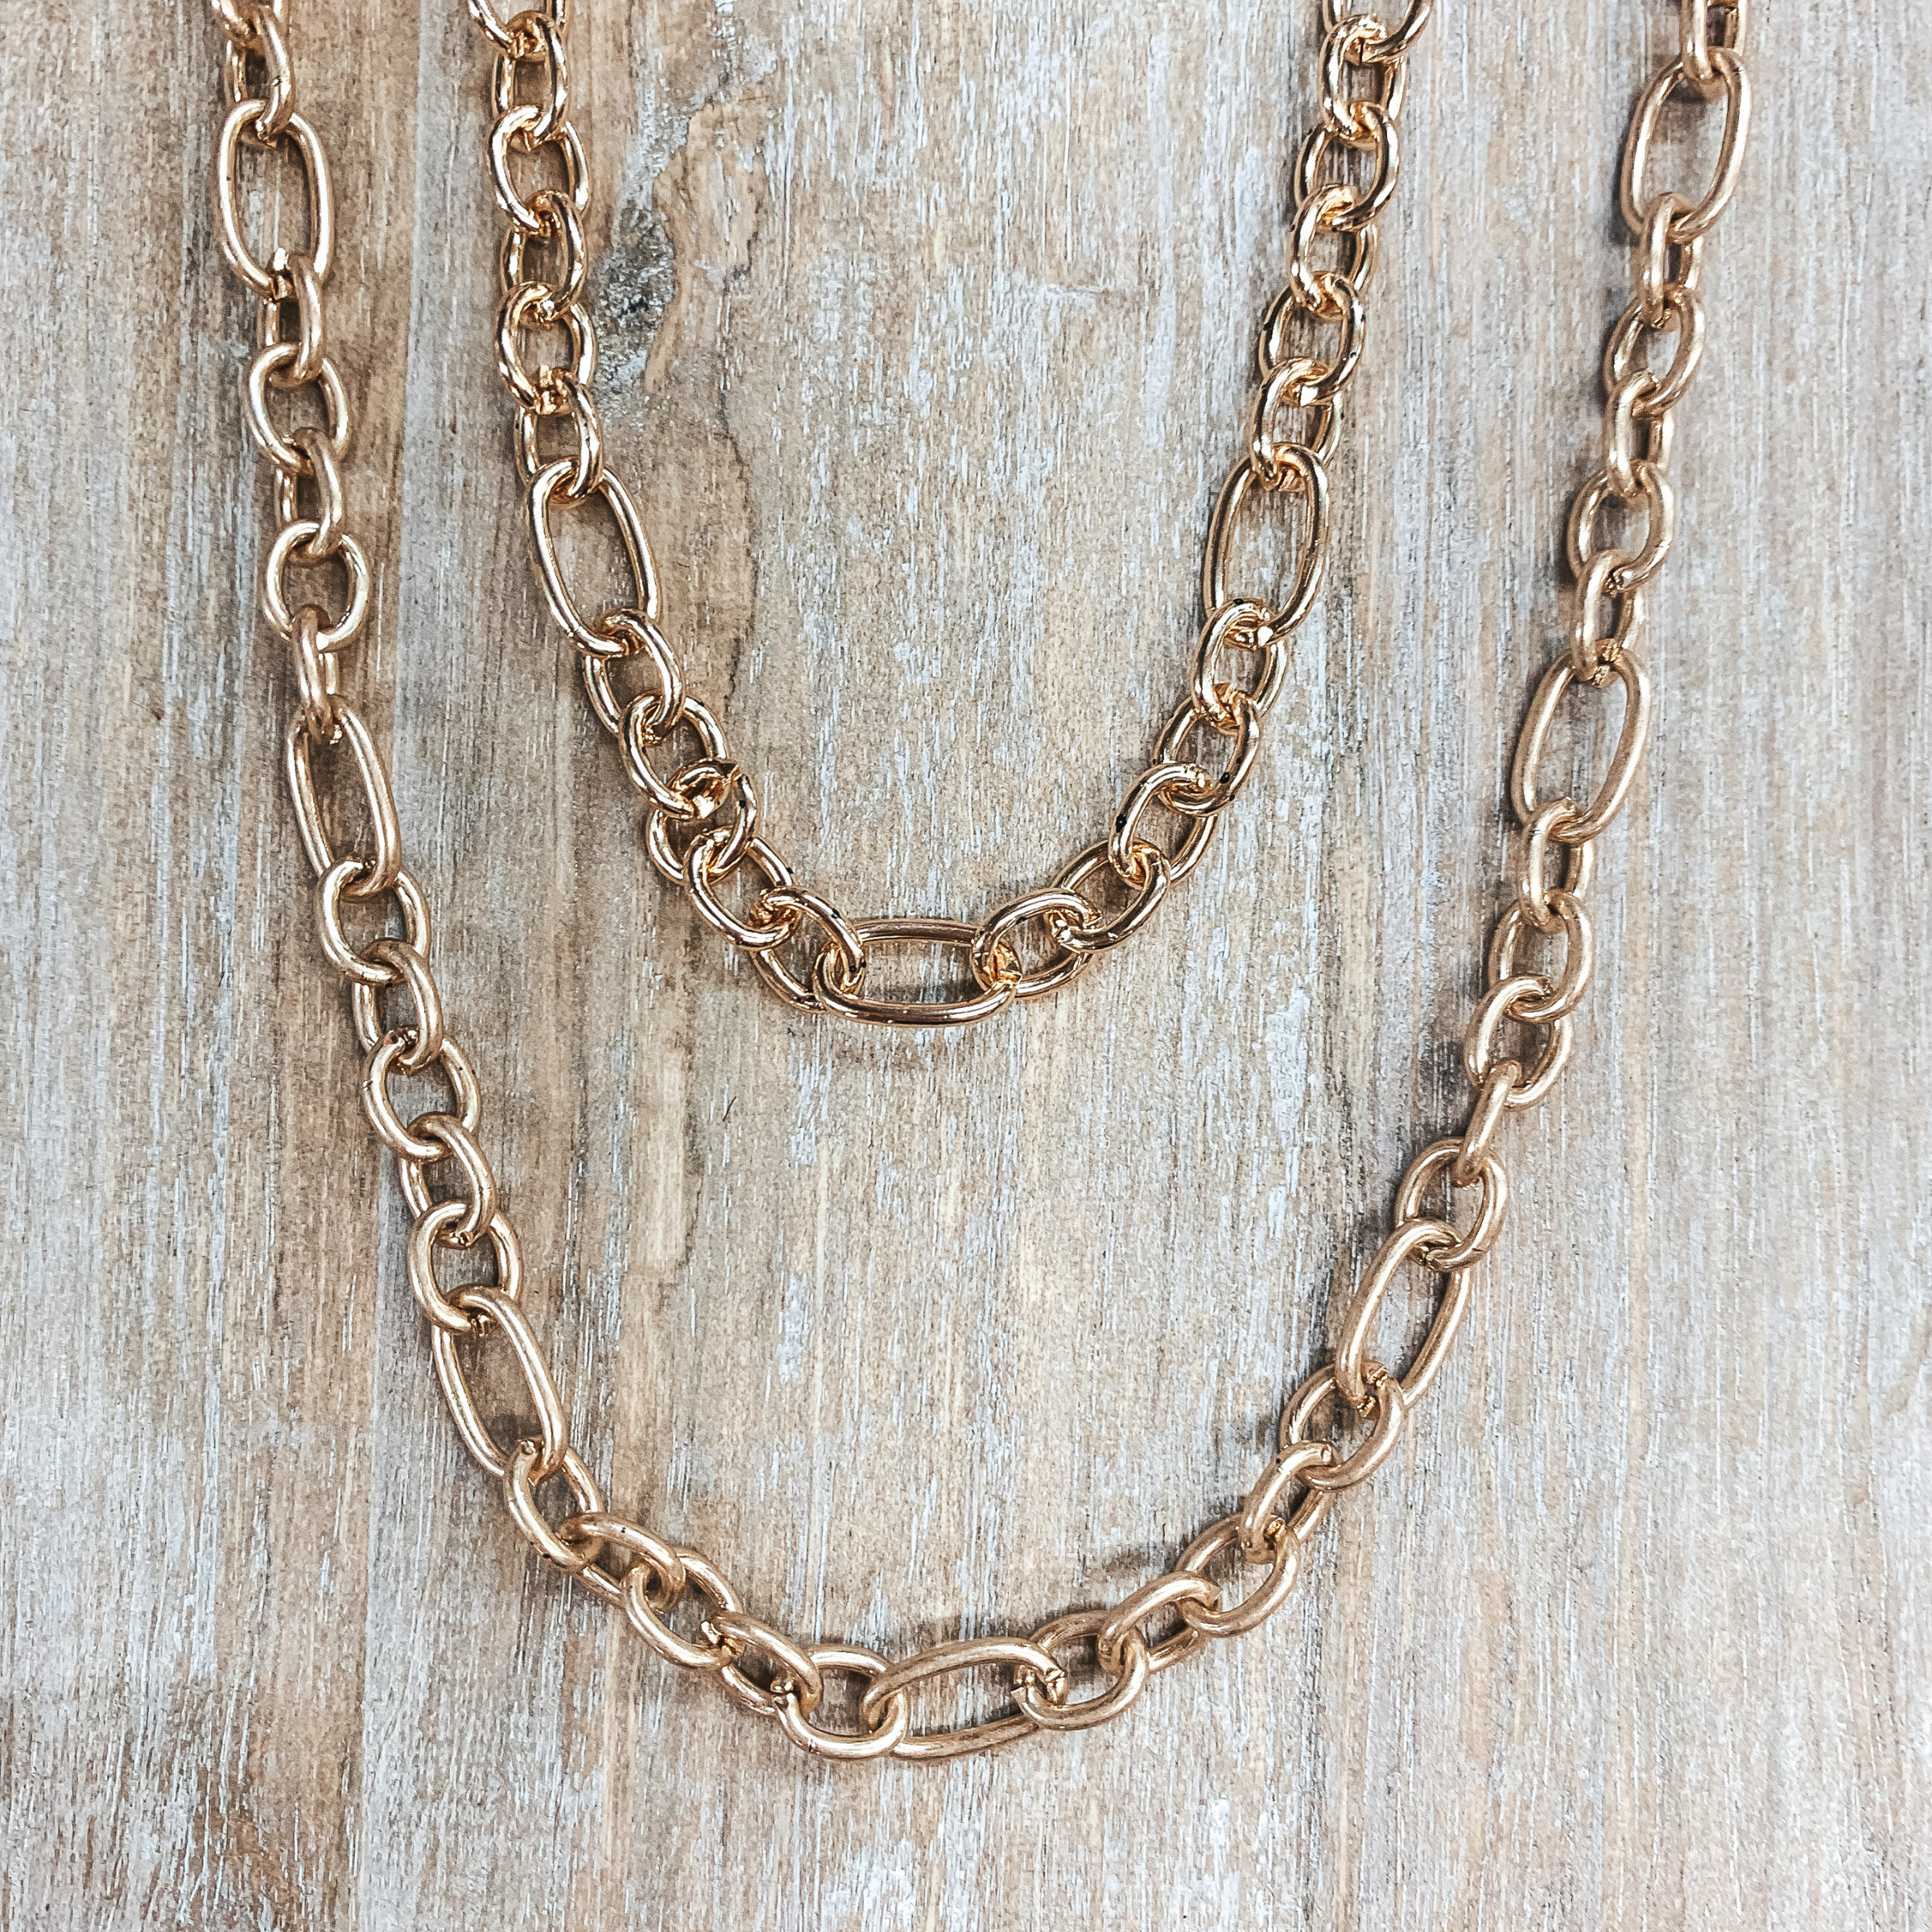 Minimalist Chain Link Necklace in Matte Gold - Giddy Up Glamour Boutique